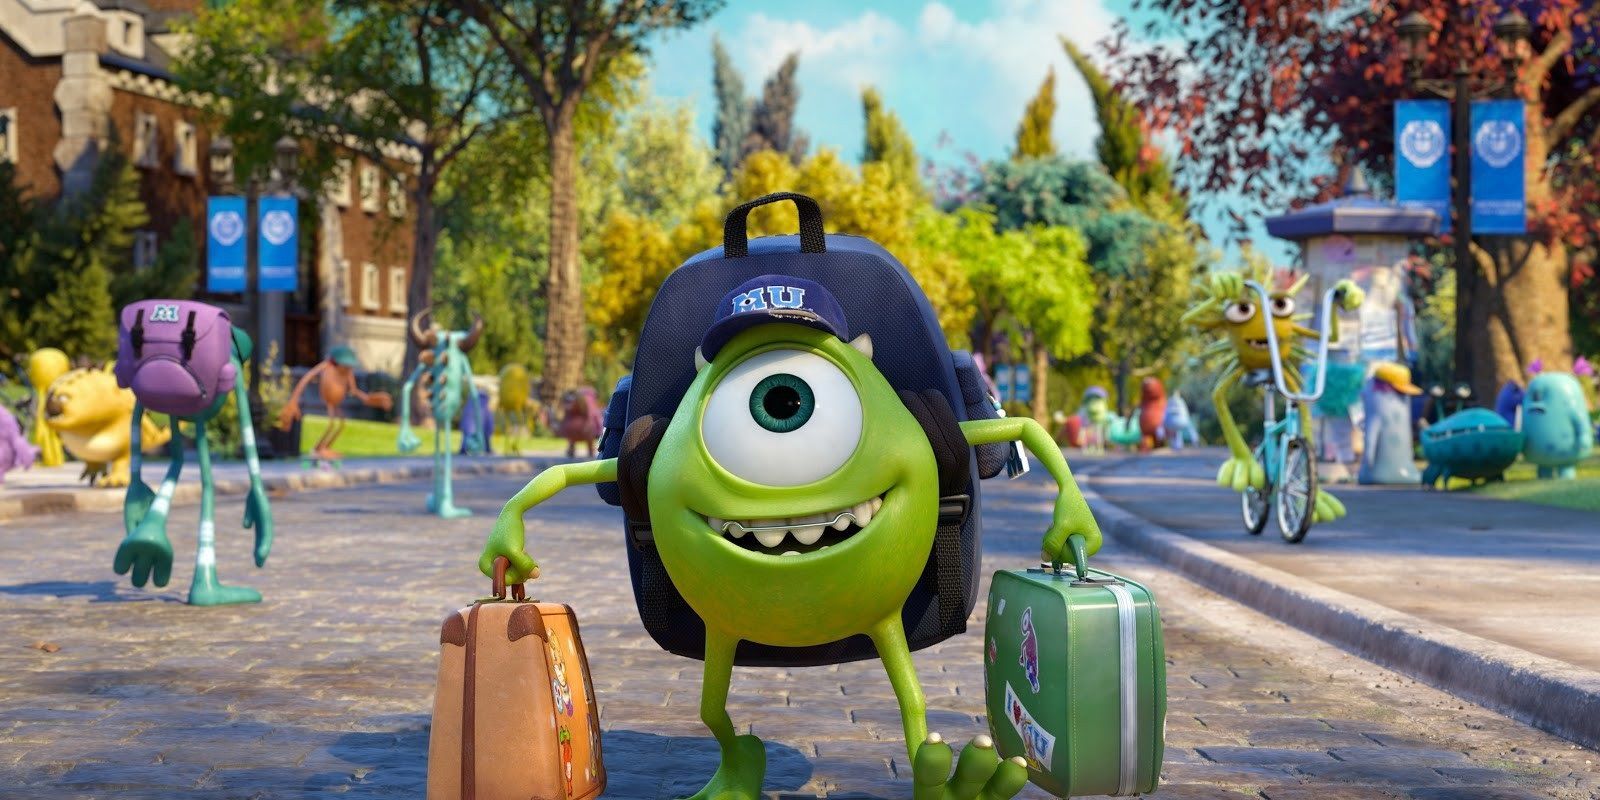 Mike enters college campus with suitcases in Monsters University